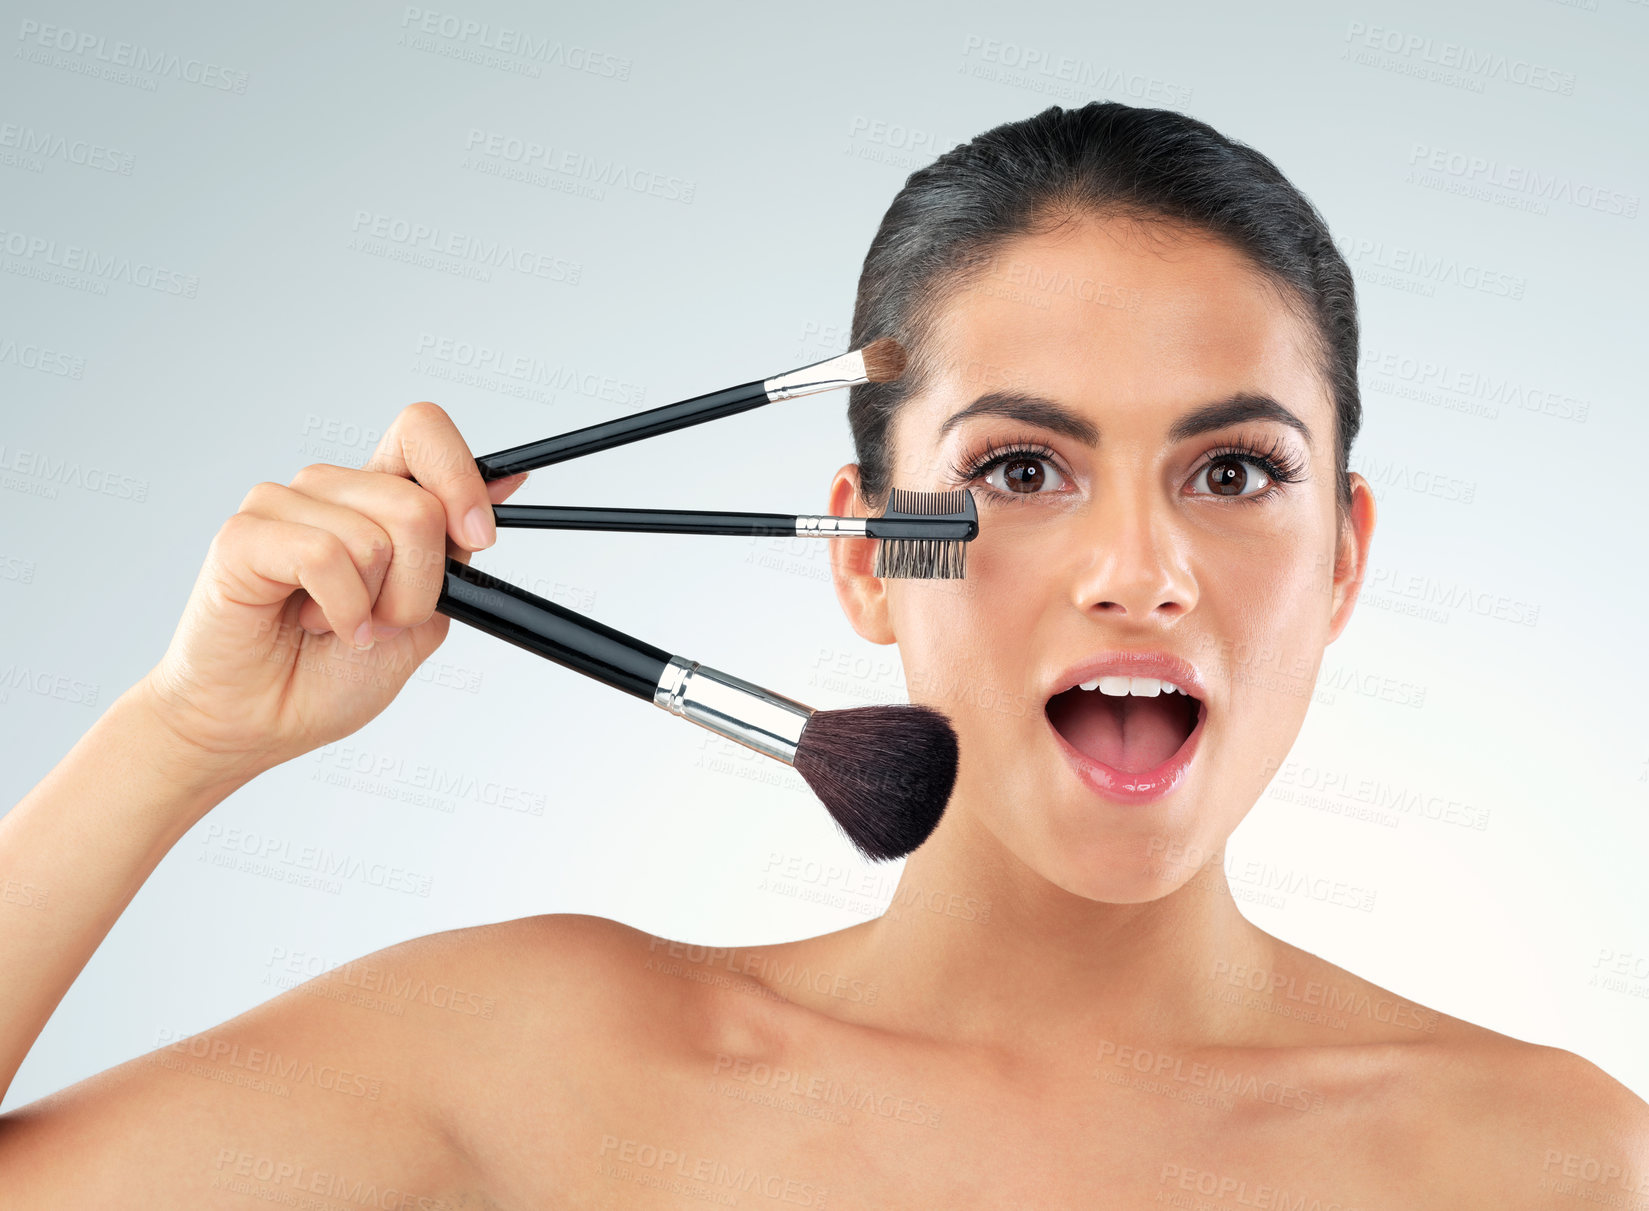 Buy stock photo Studio shot of a beautiful young woman holding makeup brushes against a gray background